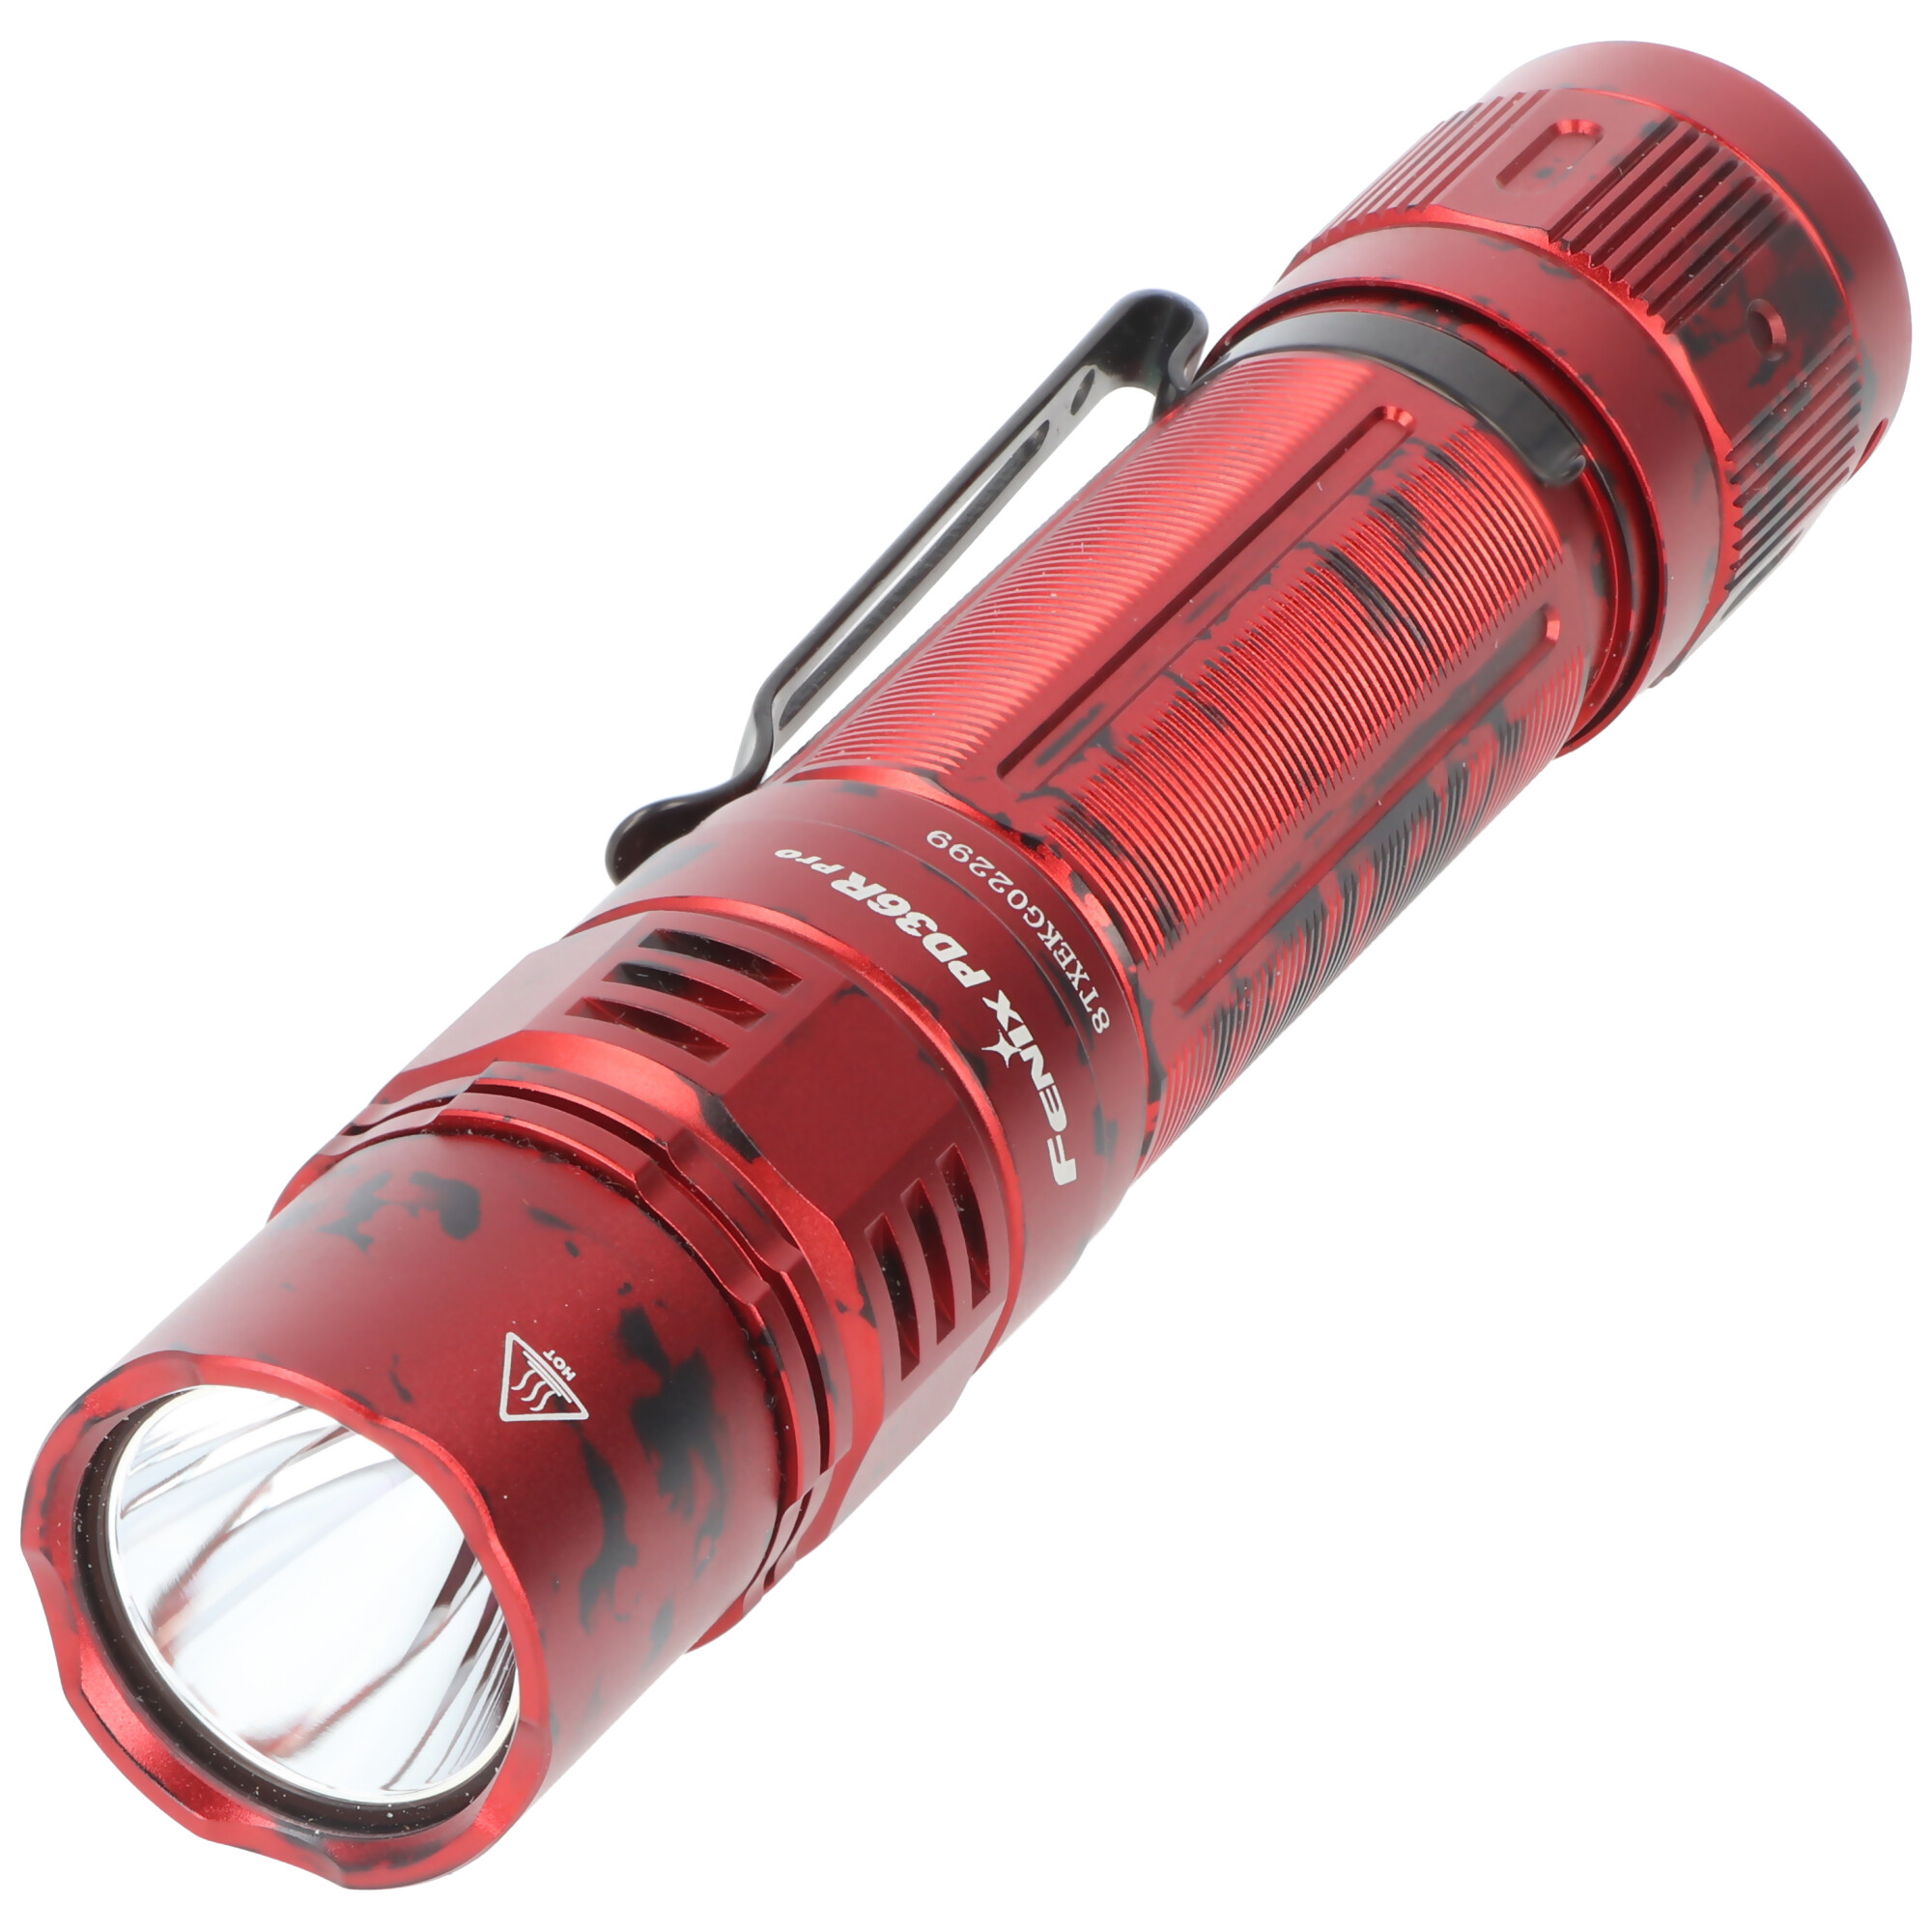 Fenix PD36R Pro LED Taschenlampe Red Camouflage, Sonderversion FEPD36RPRORed